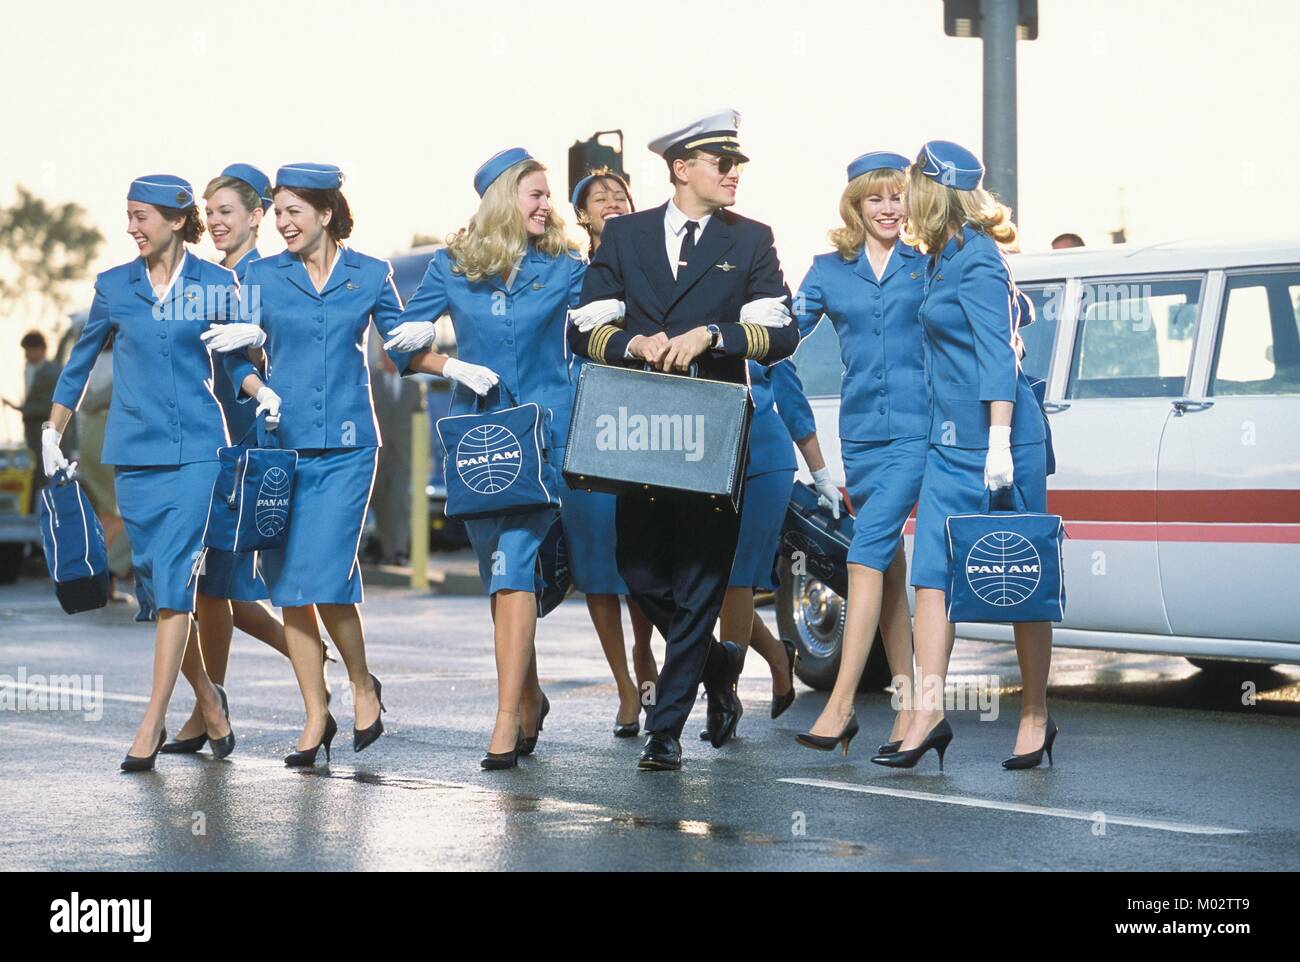 Pan Am Stewardess High Resolution Stock Photography and Images - Alamy